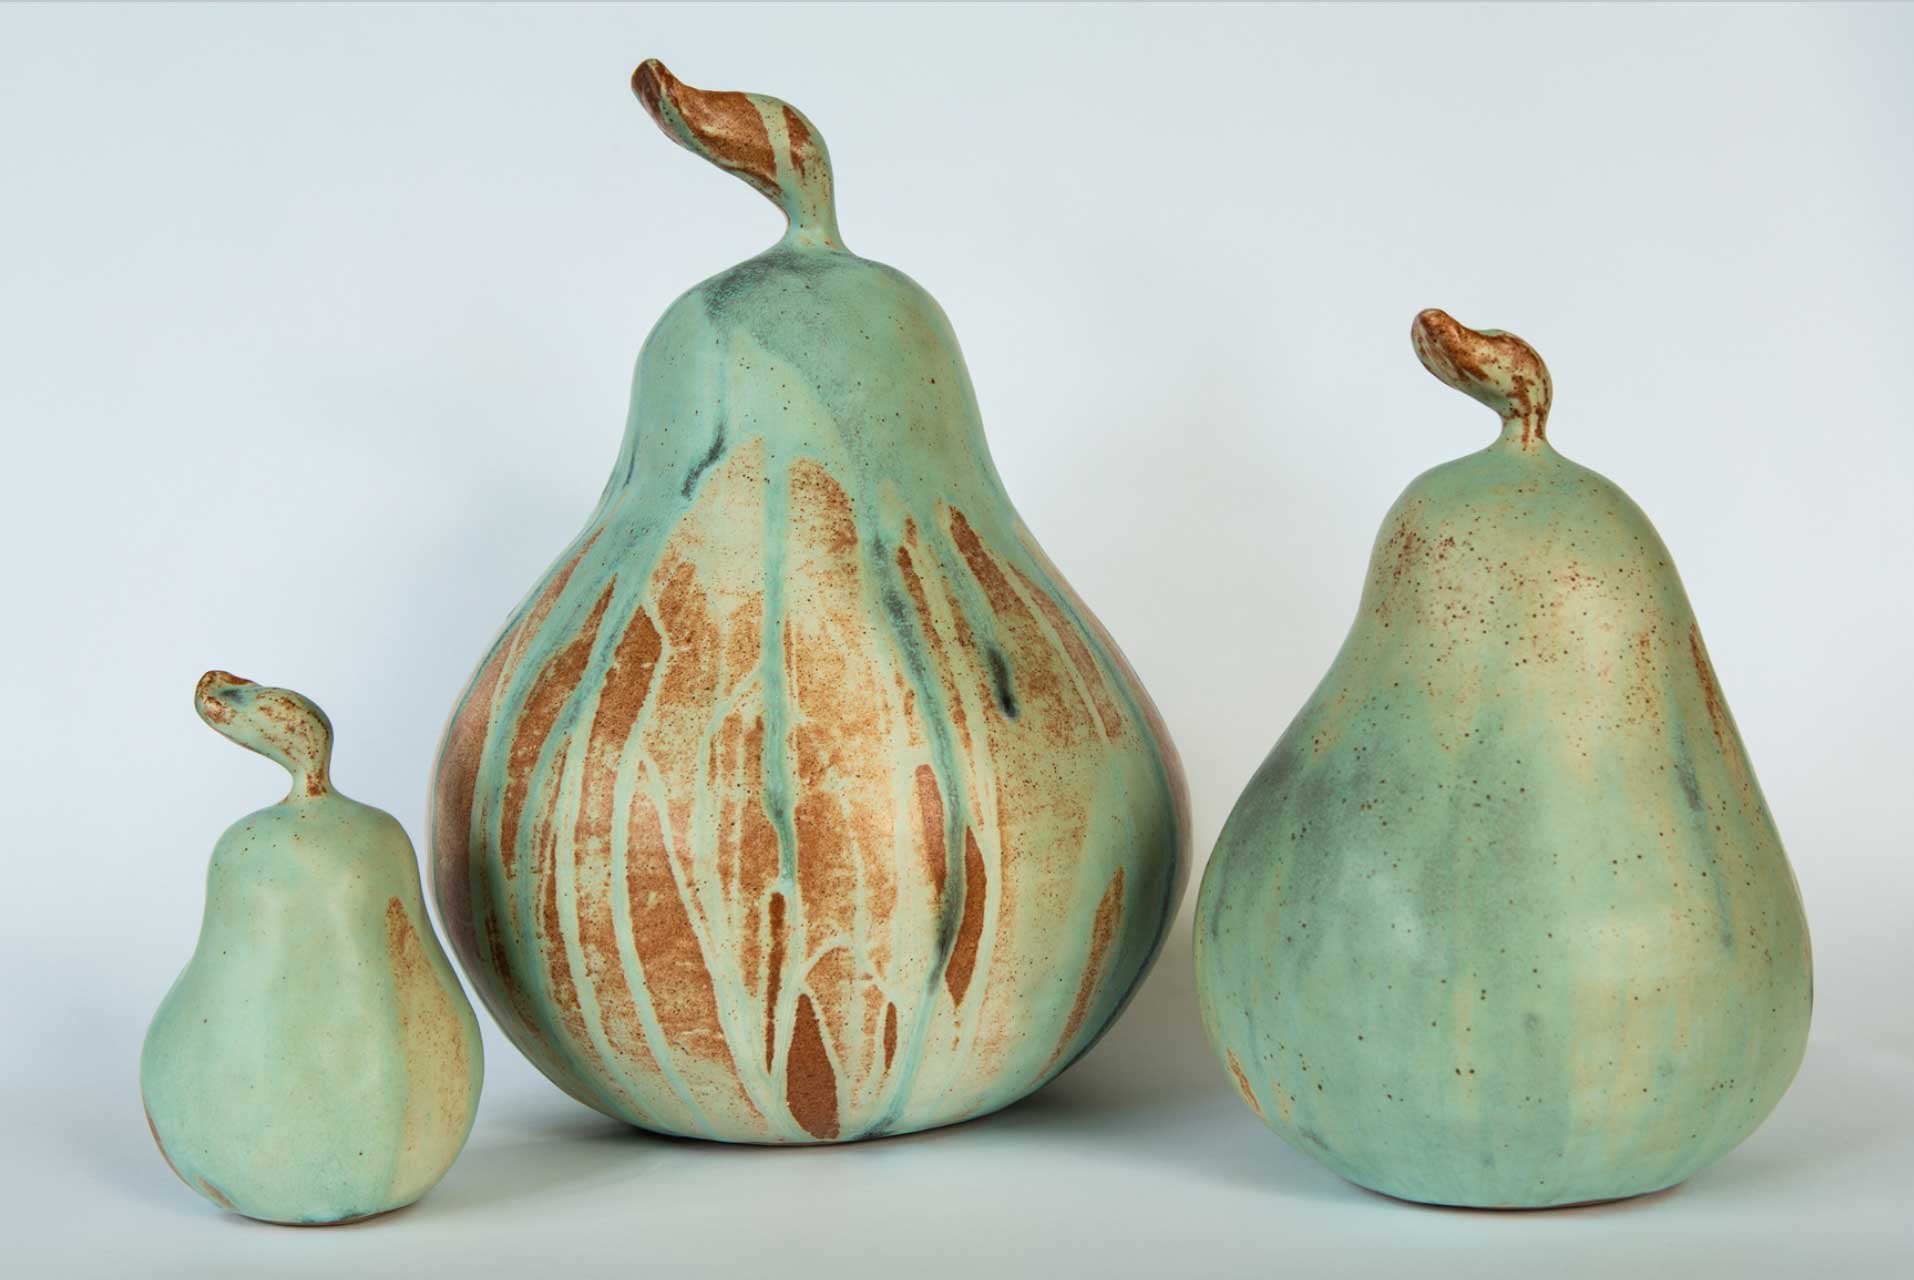 Pears by Cathy Outen